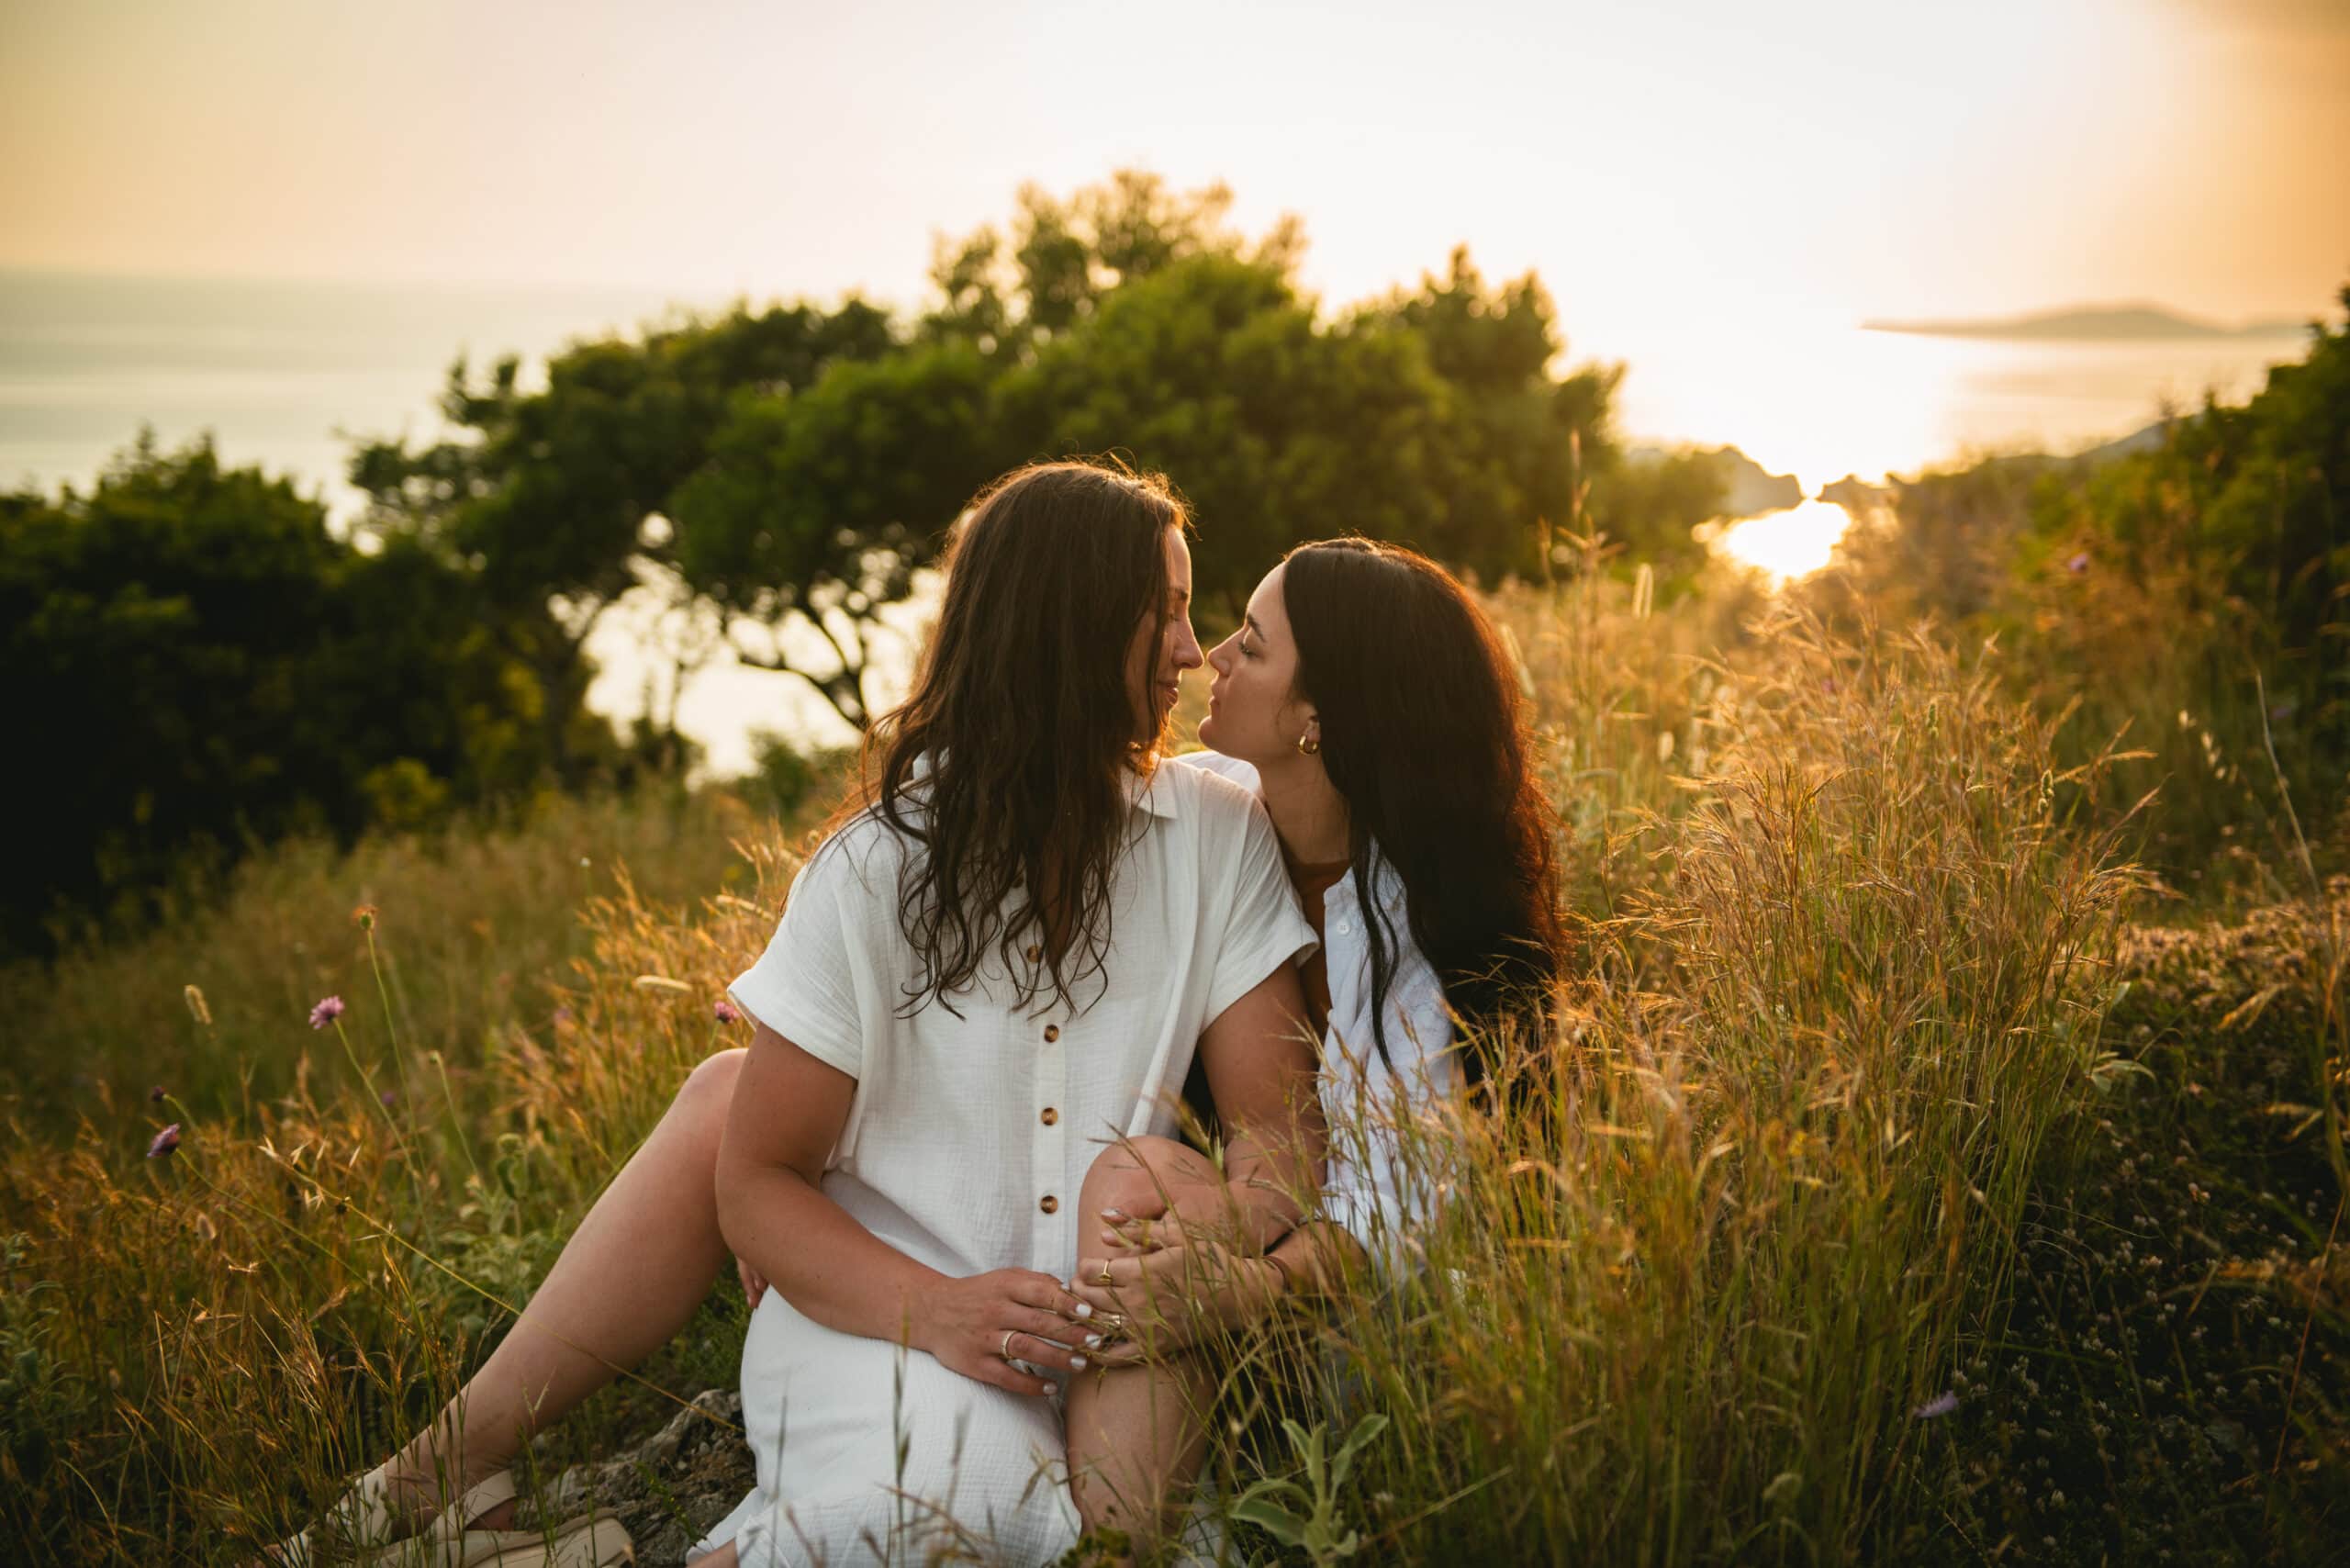 Brides sharing a heartfelt embrace in the soft grass, a touching moment during their Corfu elopement.